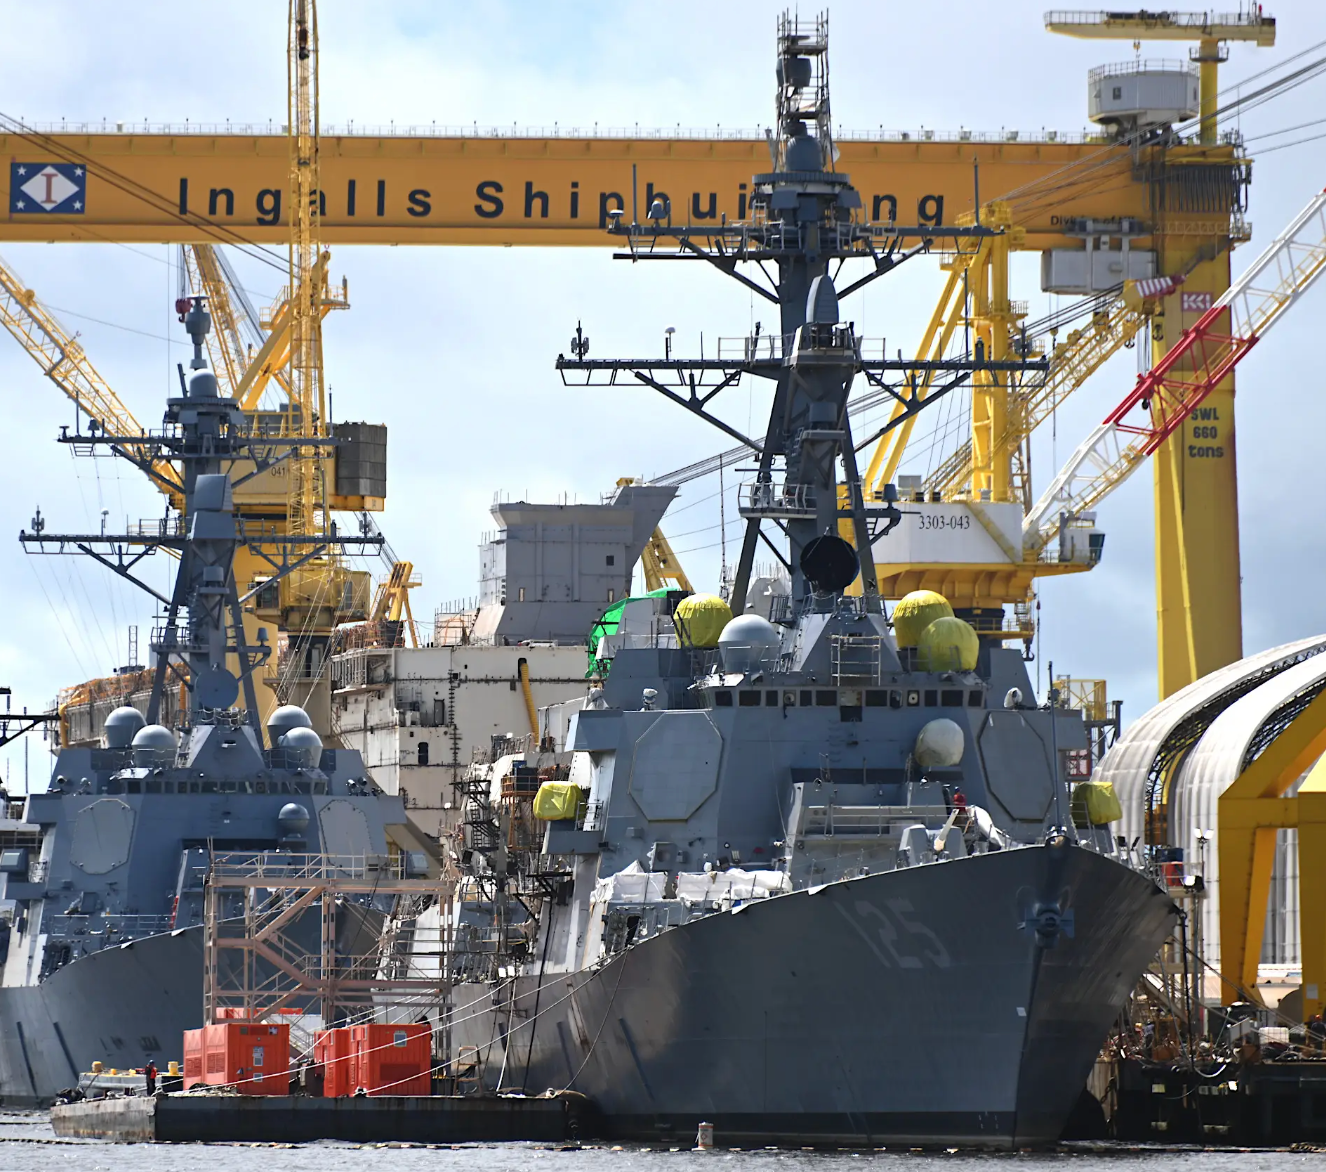 The future USS&nbsp;<em>Jack H. Lucas</em>&nbsp;being fitted out in Pascagoula, Mississippi in August 2022. The future USS&nbsp;<em>Lenah H. Sutcliffe Higbee</em>, a Flight IIA&nbsp;<em>Arleigh Burke</em>&nbsp;class destroyer, is directly behind, offering a good comparison between the fixed-face antennas for the new AN/SPY-6(V)1 radar and those for the older AN/SPY-1D fitted to earlier ships of this class. Neither vessel has SEWIP Block III installed.&nbsp;<em>Chris Cavas photo</em>&nbsp;<br>